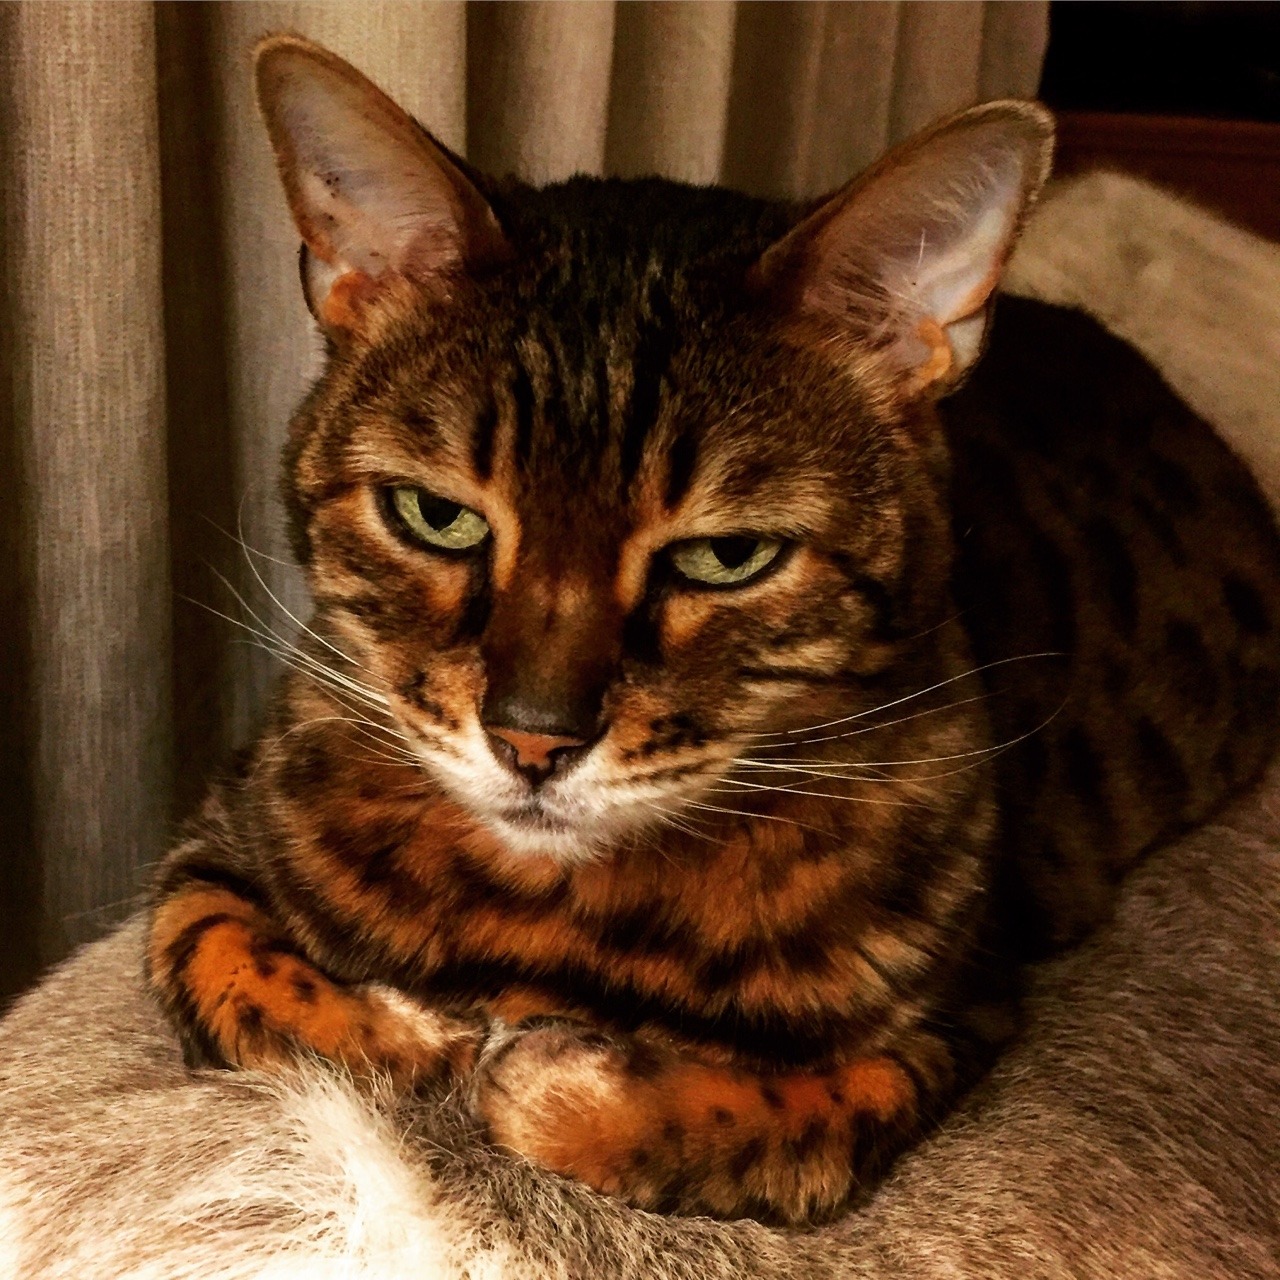 <p>Imperial Grand Premier Zawadi Olympia our foundation queen 10 years old this year 
#kittensofinstagram #bengalkittens #bengalkitten #bengallove #Bengals #bengalcats #kittens
#beautiful #bengal #bengalcat #bengalofinstagram #bengalcat #catsofinstagram #nevaehbengals #cats #kittens #wildcat #photooftheday #catoftheday #bengallove #lovekittens #bengalworld #ilovemycat #lovecats #cutepetclub #bengalcatassociation #bengalkittensforsale #nevaehbengals #kittenoftheday #kittens #kittenlove #kittenloversofinstagram #bengalcatassociation</p>